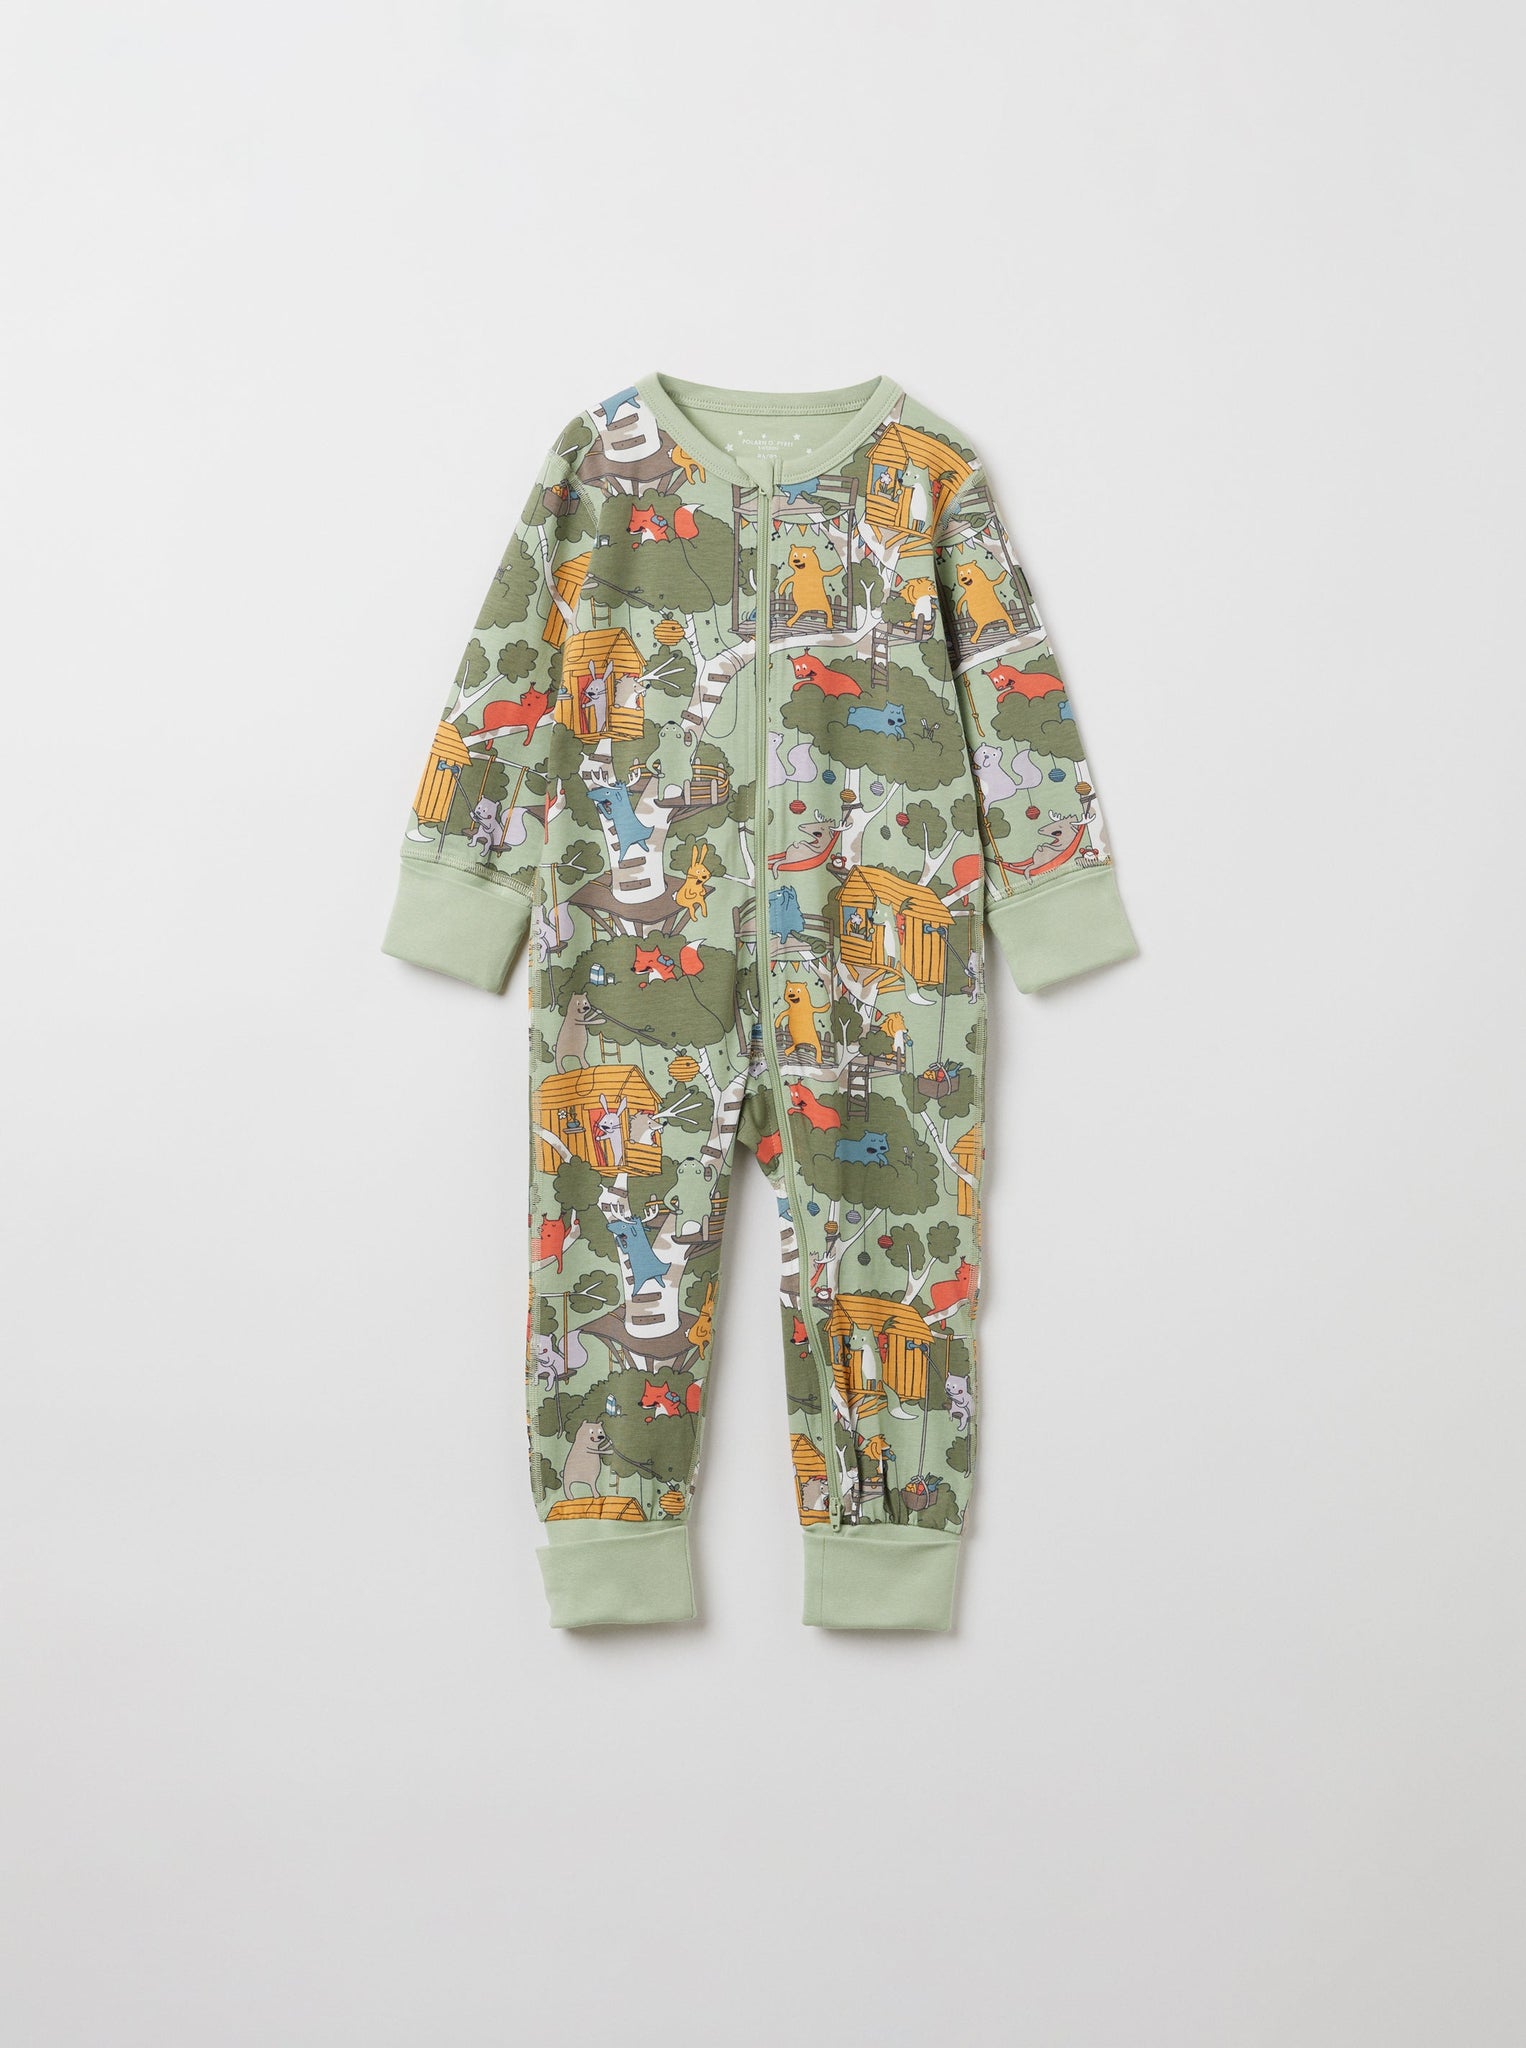 Organic Cotton Green Kids Sleepsuit from the Polarn O. Pyret kidswear collection. Clothes made using sustainably sourced materials.